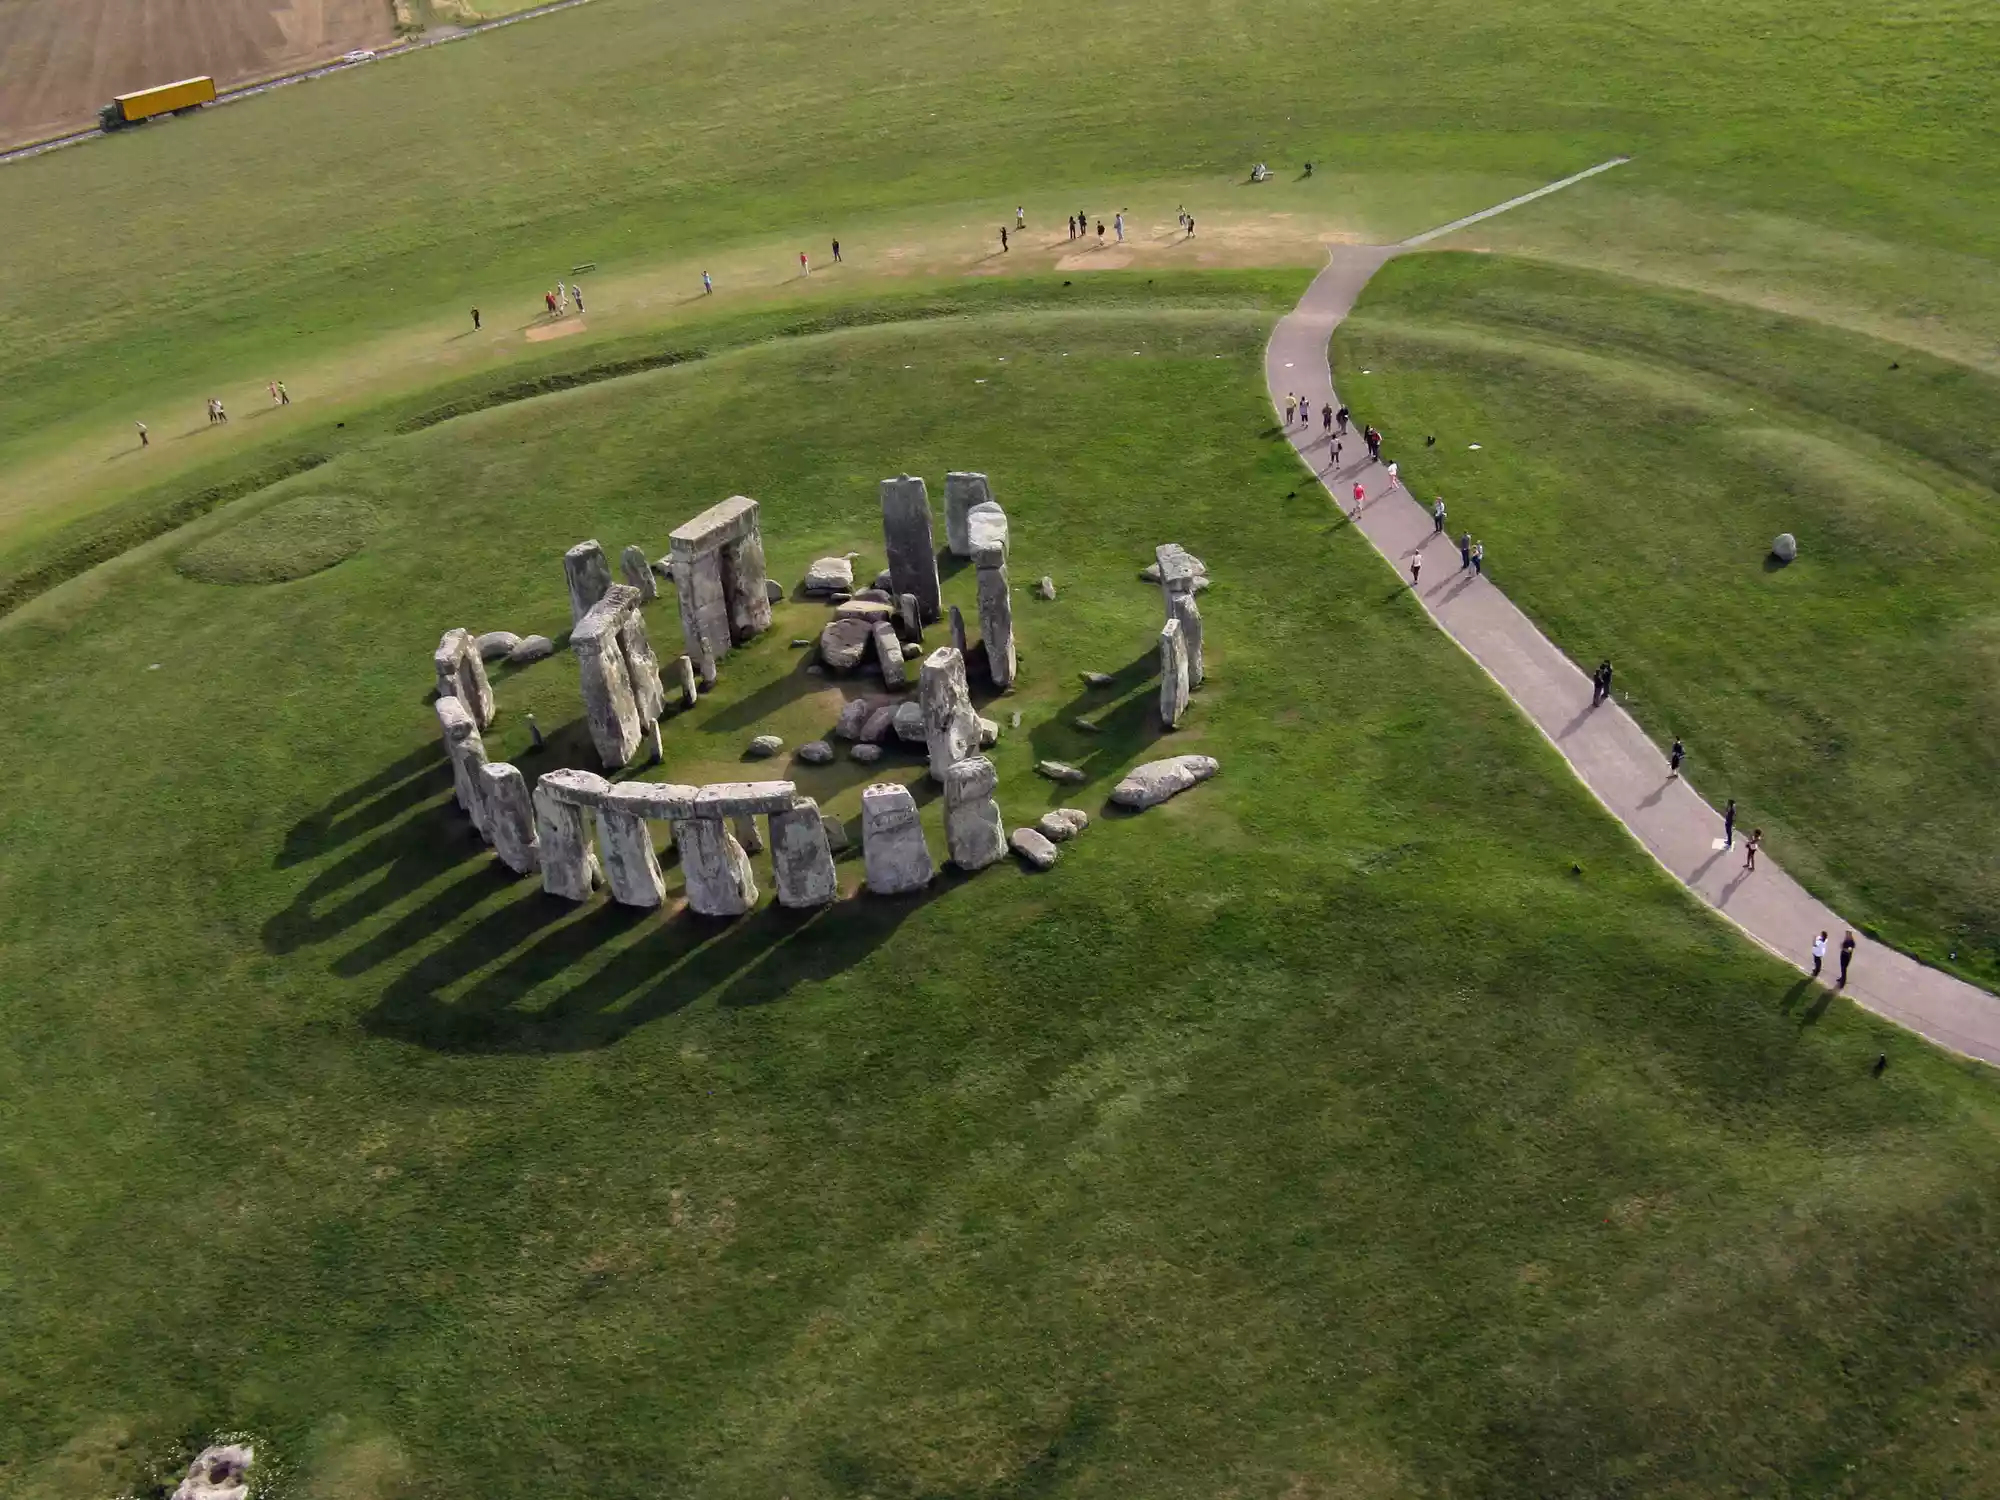 An overhead shot of Stonehenge and visitors on a nearby pathway